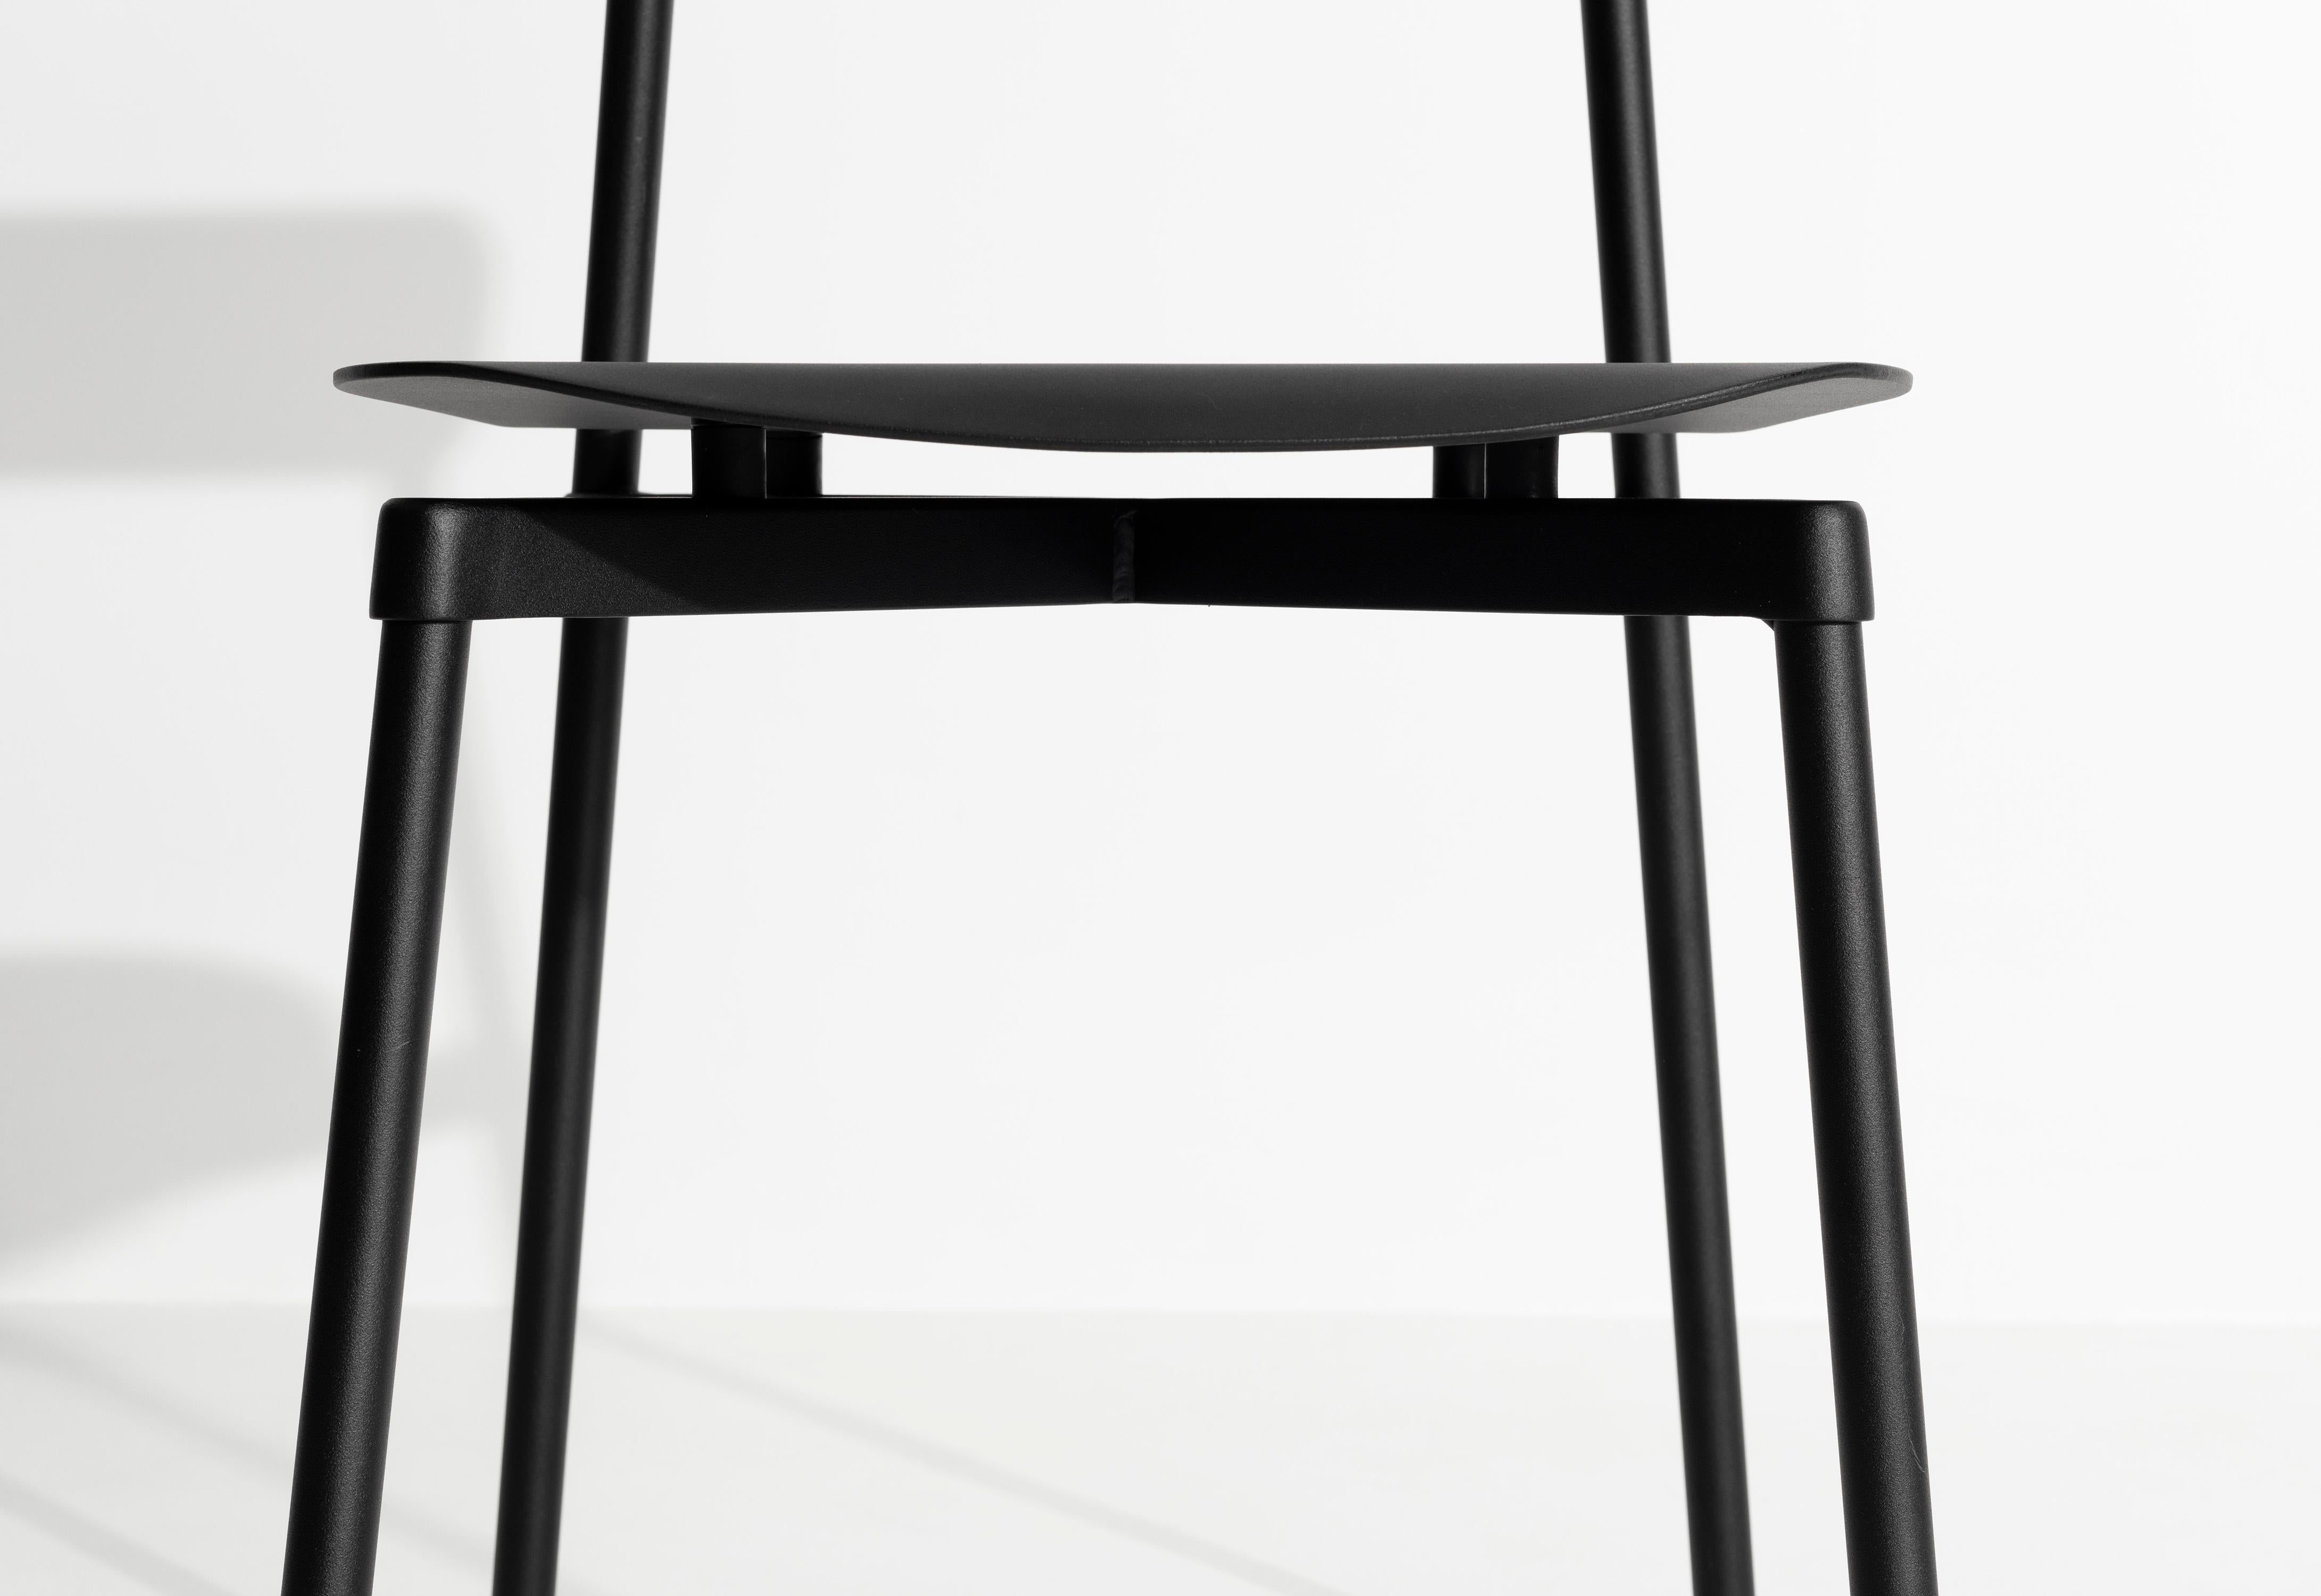 Aluminum Petite Friture Fromme Chair in Black Aluminium by Tom Chung, 2019 For Sale